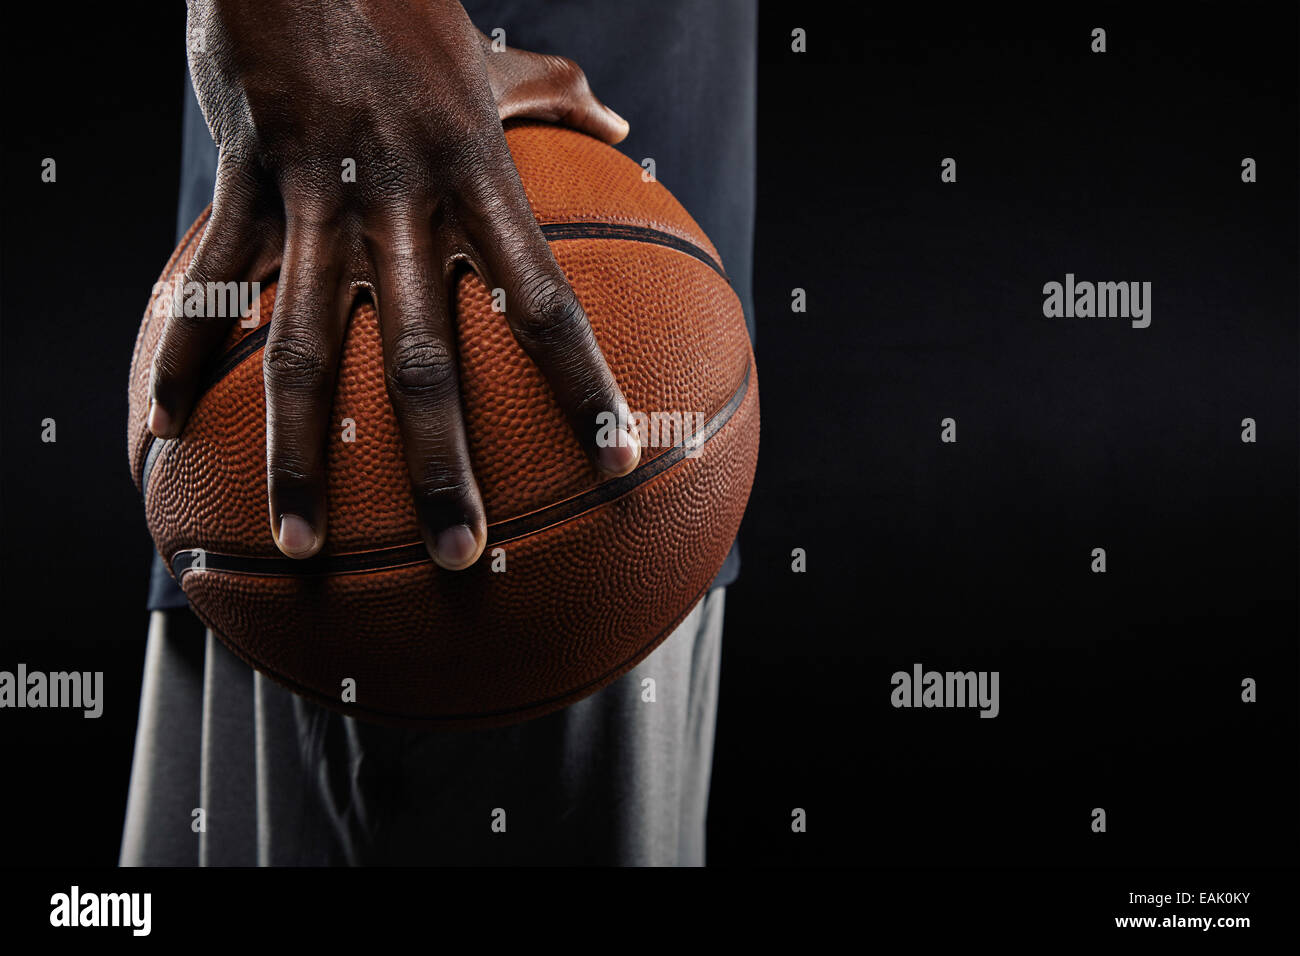 Close-up of a hand of basketball player holding a ball against black background. Stock Photo